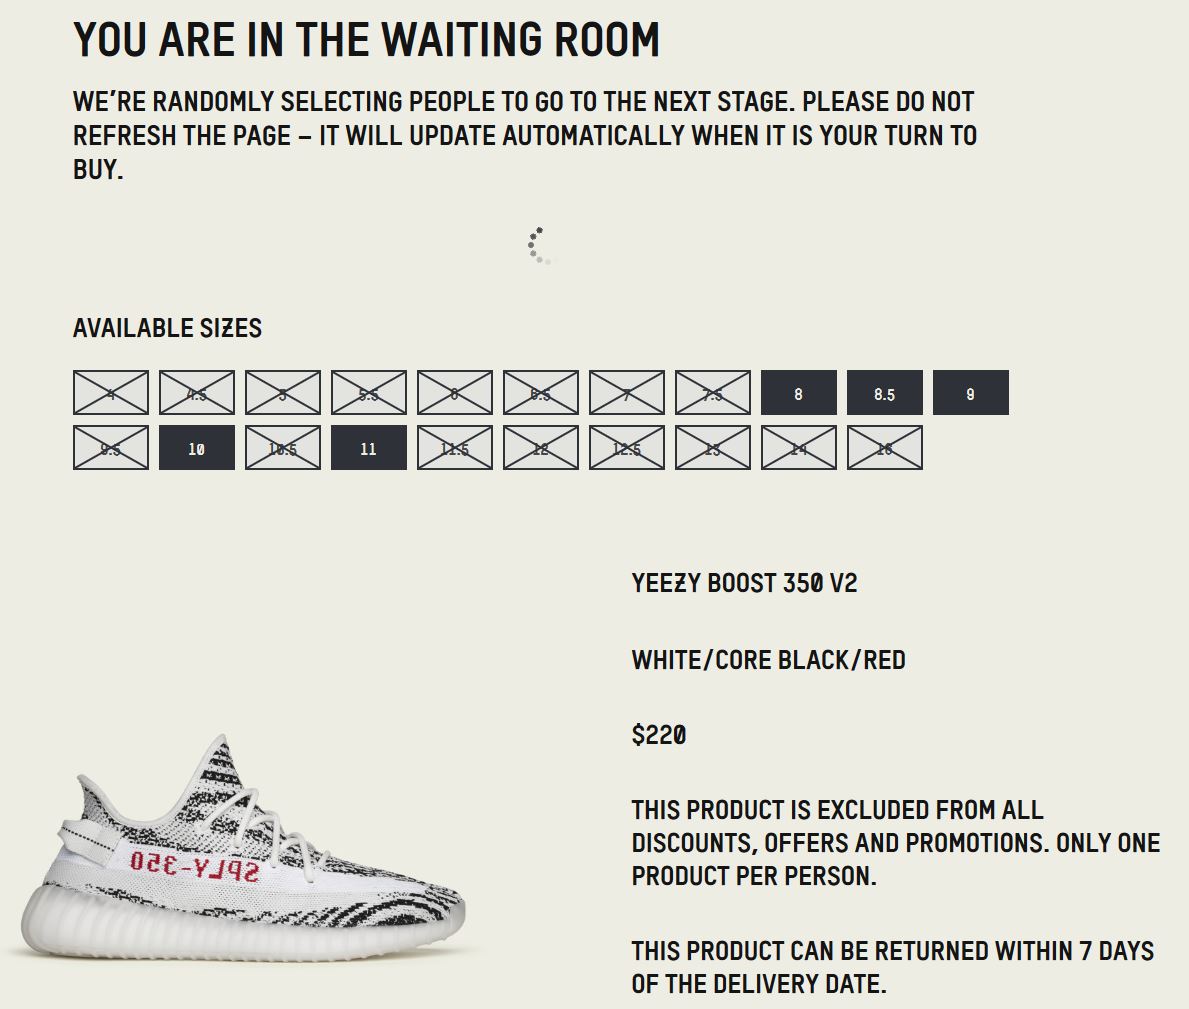 you are in line to purchase please do not refresh yeezy